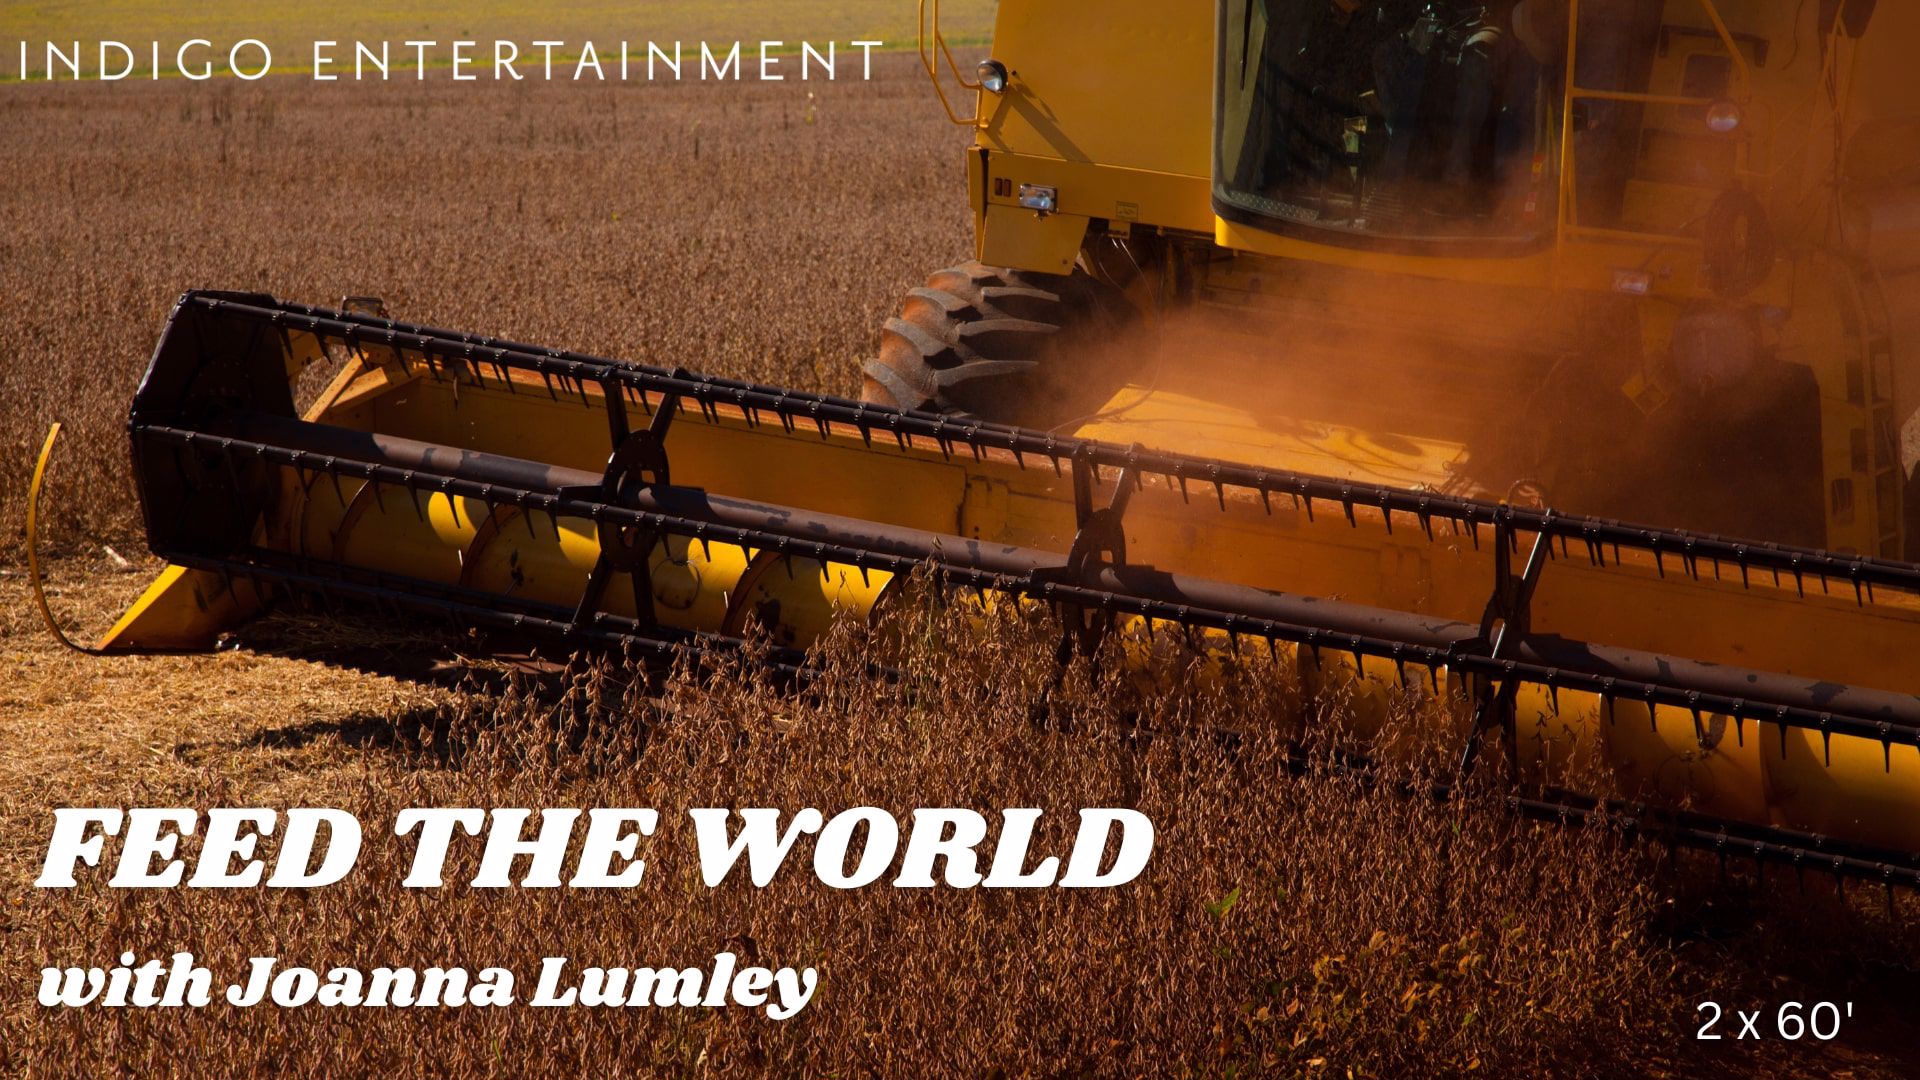 Feed the World with Joanna Lumley